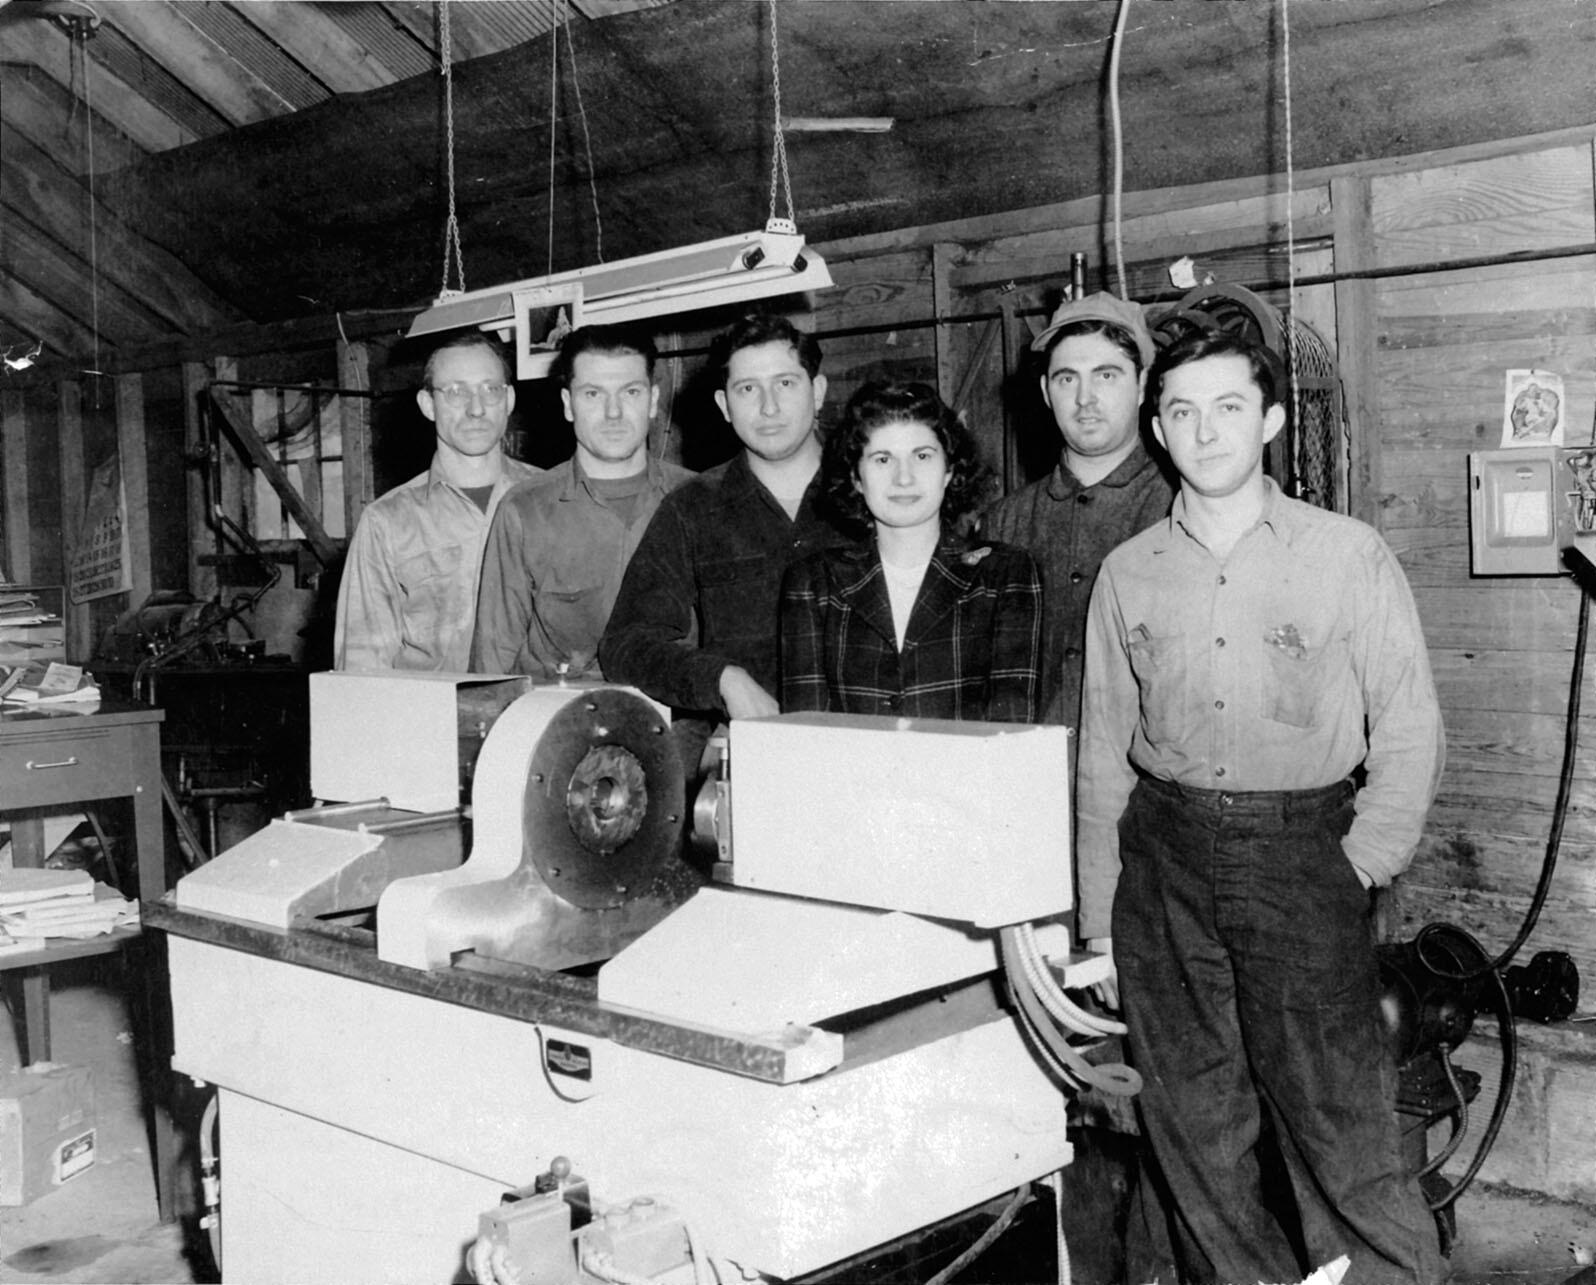 In a converted barn, Stan Ovshinsky (third from left) and his crew pose with his newly invented Benjamin Automatic Lathe in 1946. (Photo courtesy of Lillian Hoddeson and Peter Garrett.)